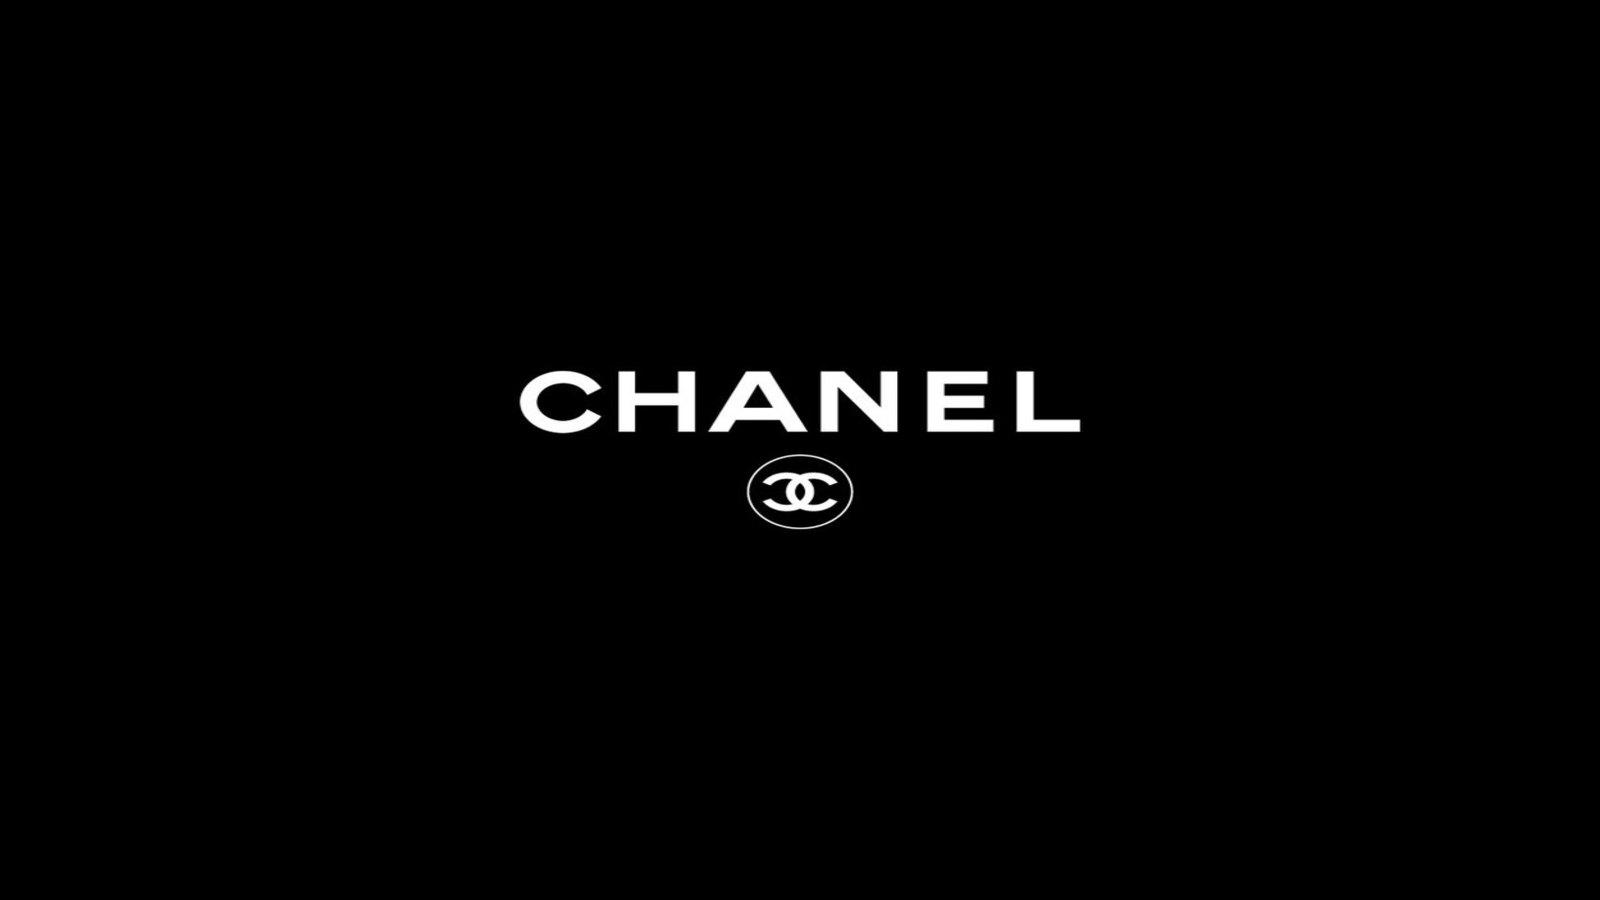 Chanel Fashion Wallpapers - Top Free Chanel Fashion Backgrounds ...